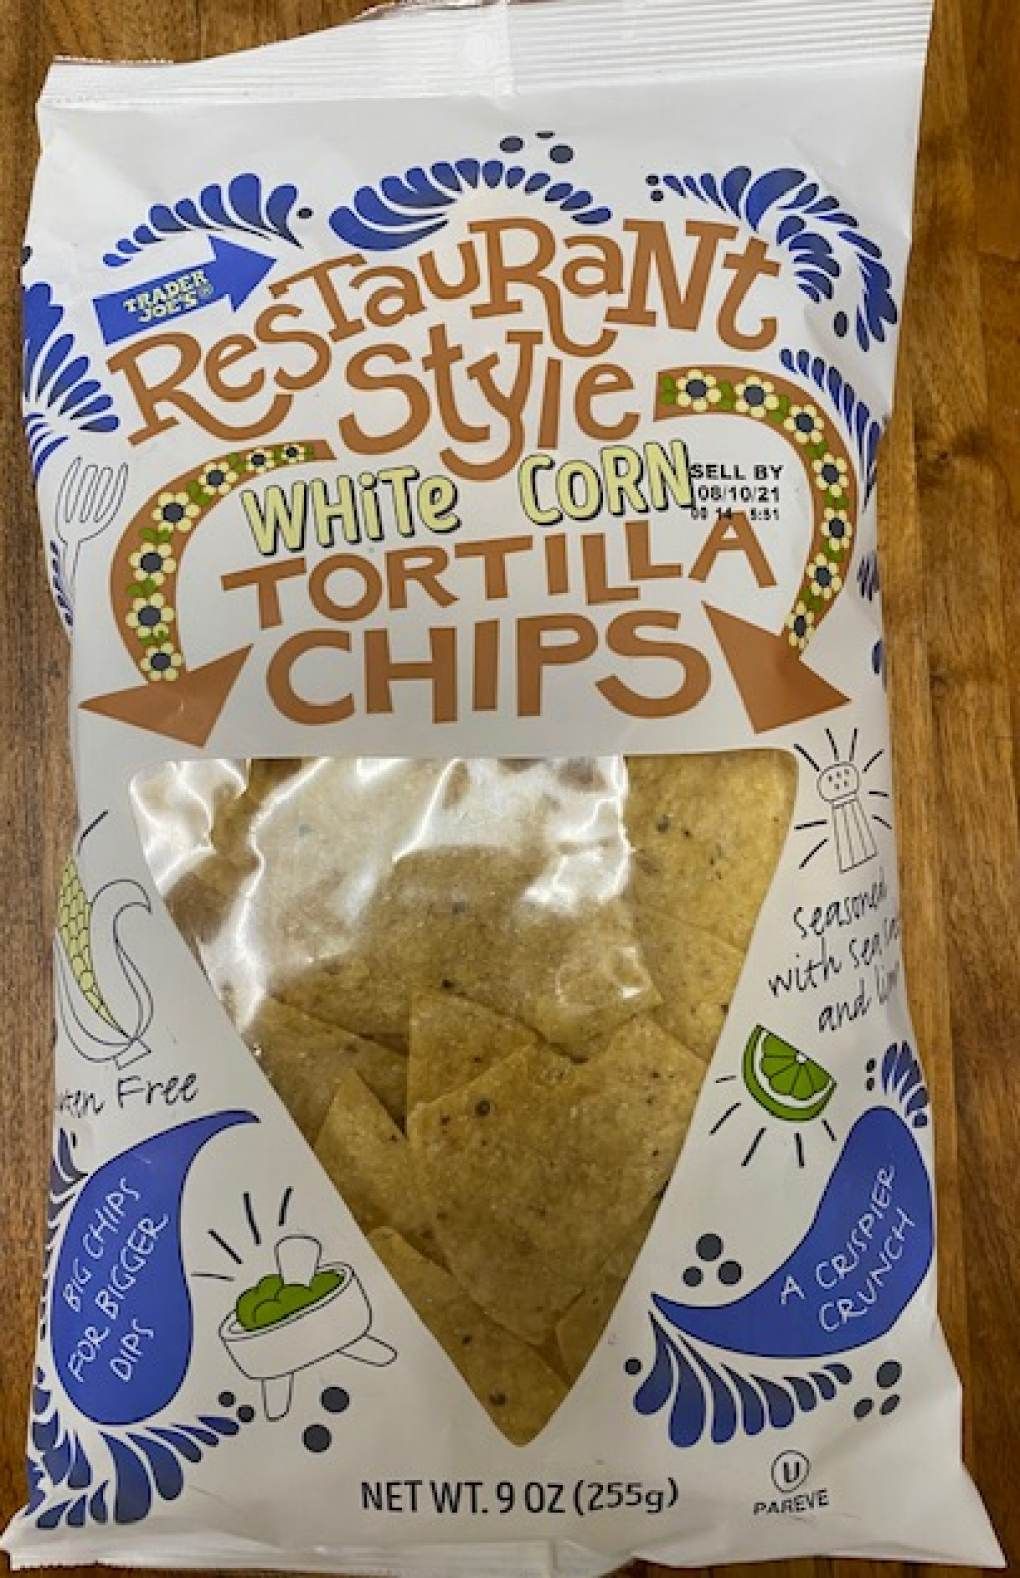 A recall has been made on Trader Joe's white corn tortilla chips due to undeclared milk.